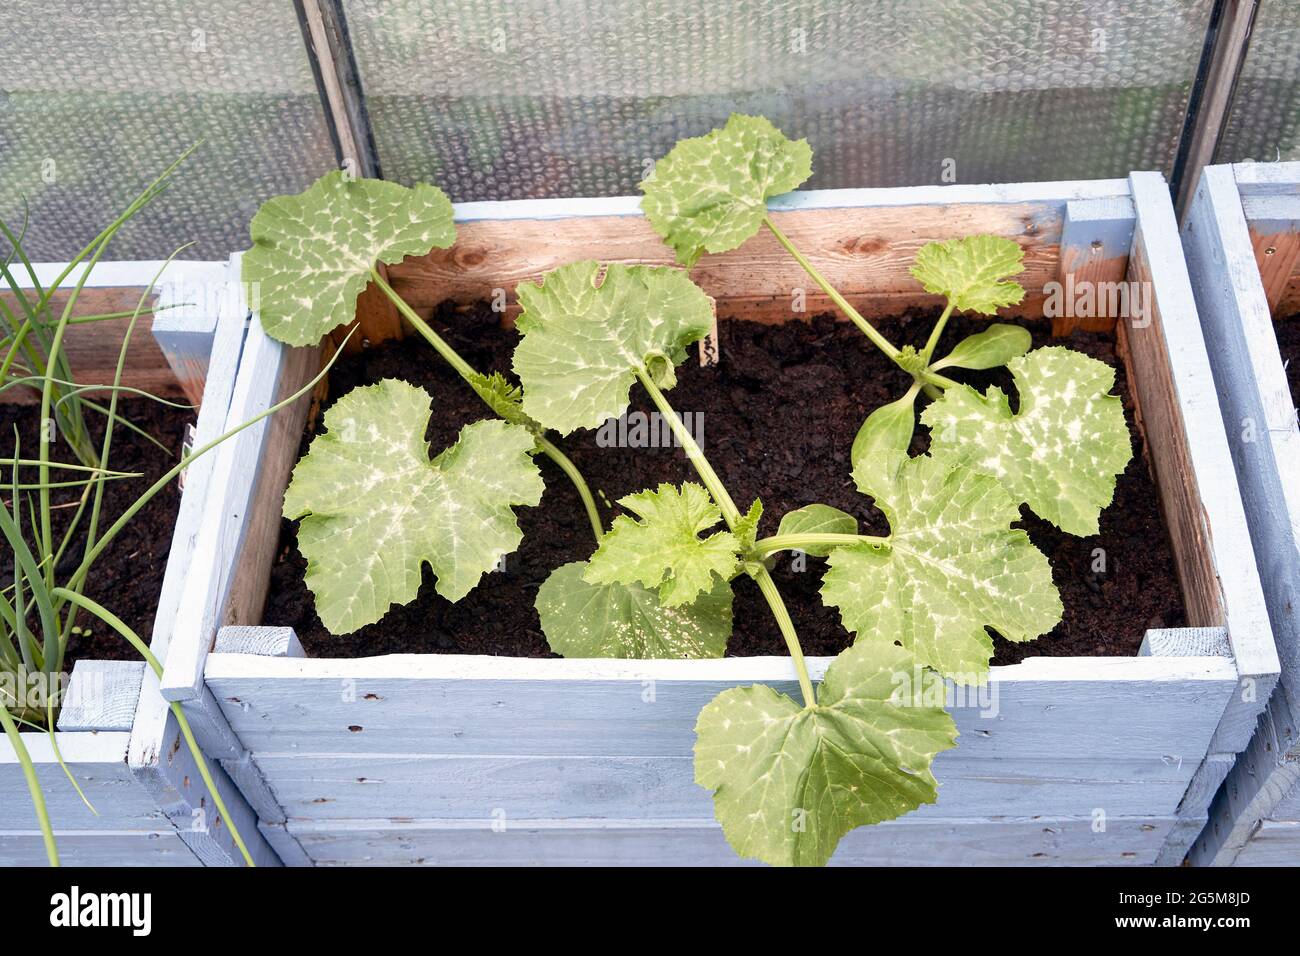 Courgette plants growing in a rustic blue painted wooden box planter Stock Photo